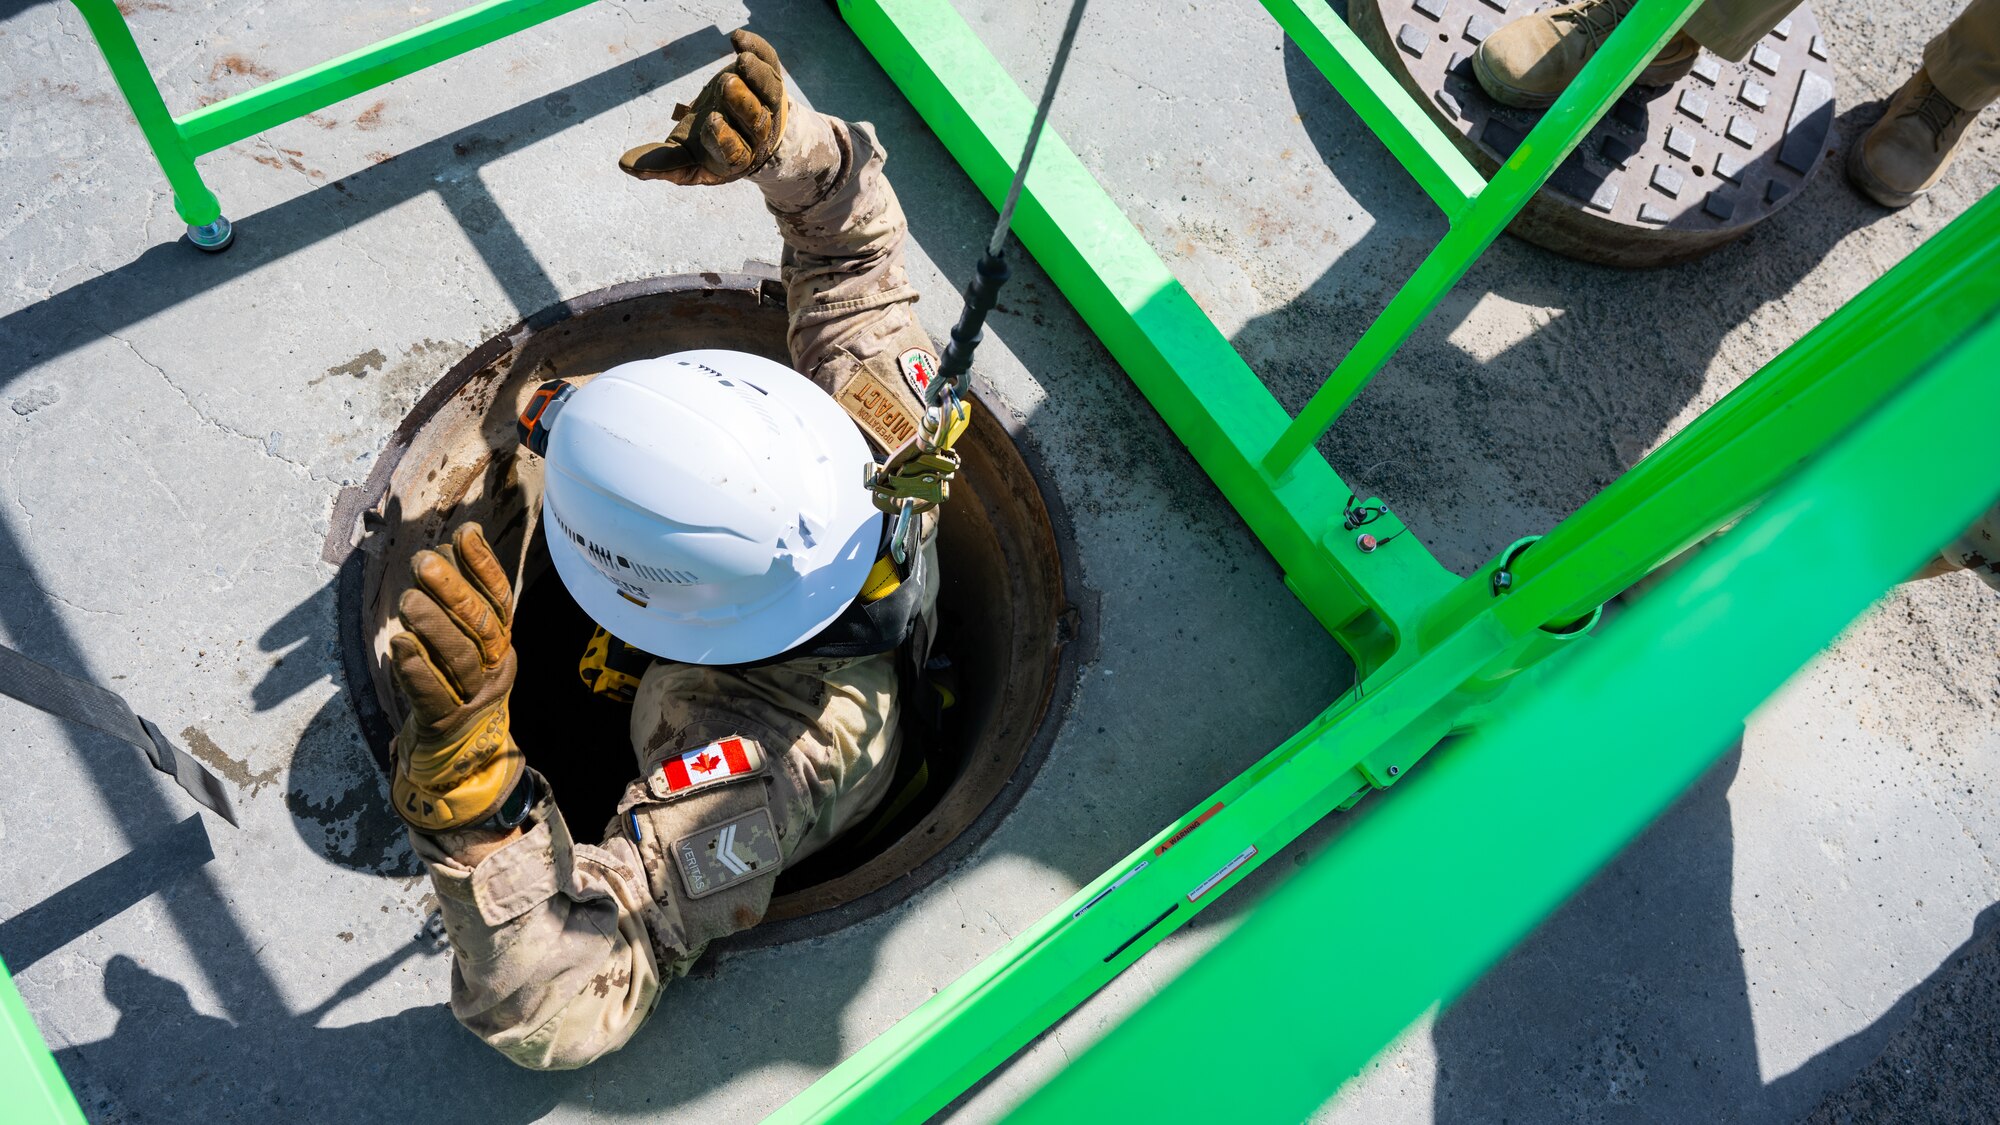 A Canadian armed forces member is hoisted up from a manhole during confined-space training at Ali Al Salem Air Base, Kuwait, July 25, 2023. This confined-space training allowed for the U.S. and our Canadian partners to share their knowledge and expertise, thus reducing the risks associated with confined-space operations for all. (U.S. Air Force photo by Staff Sgt. Kevin Long)